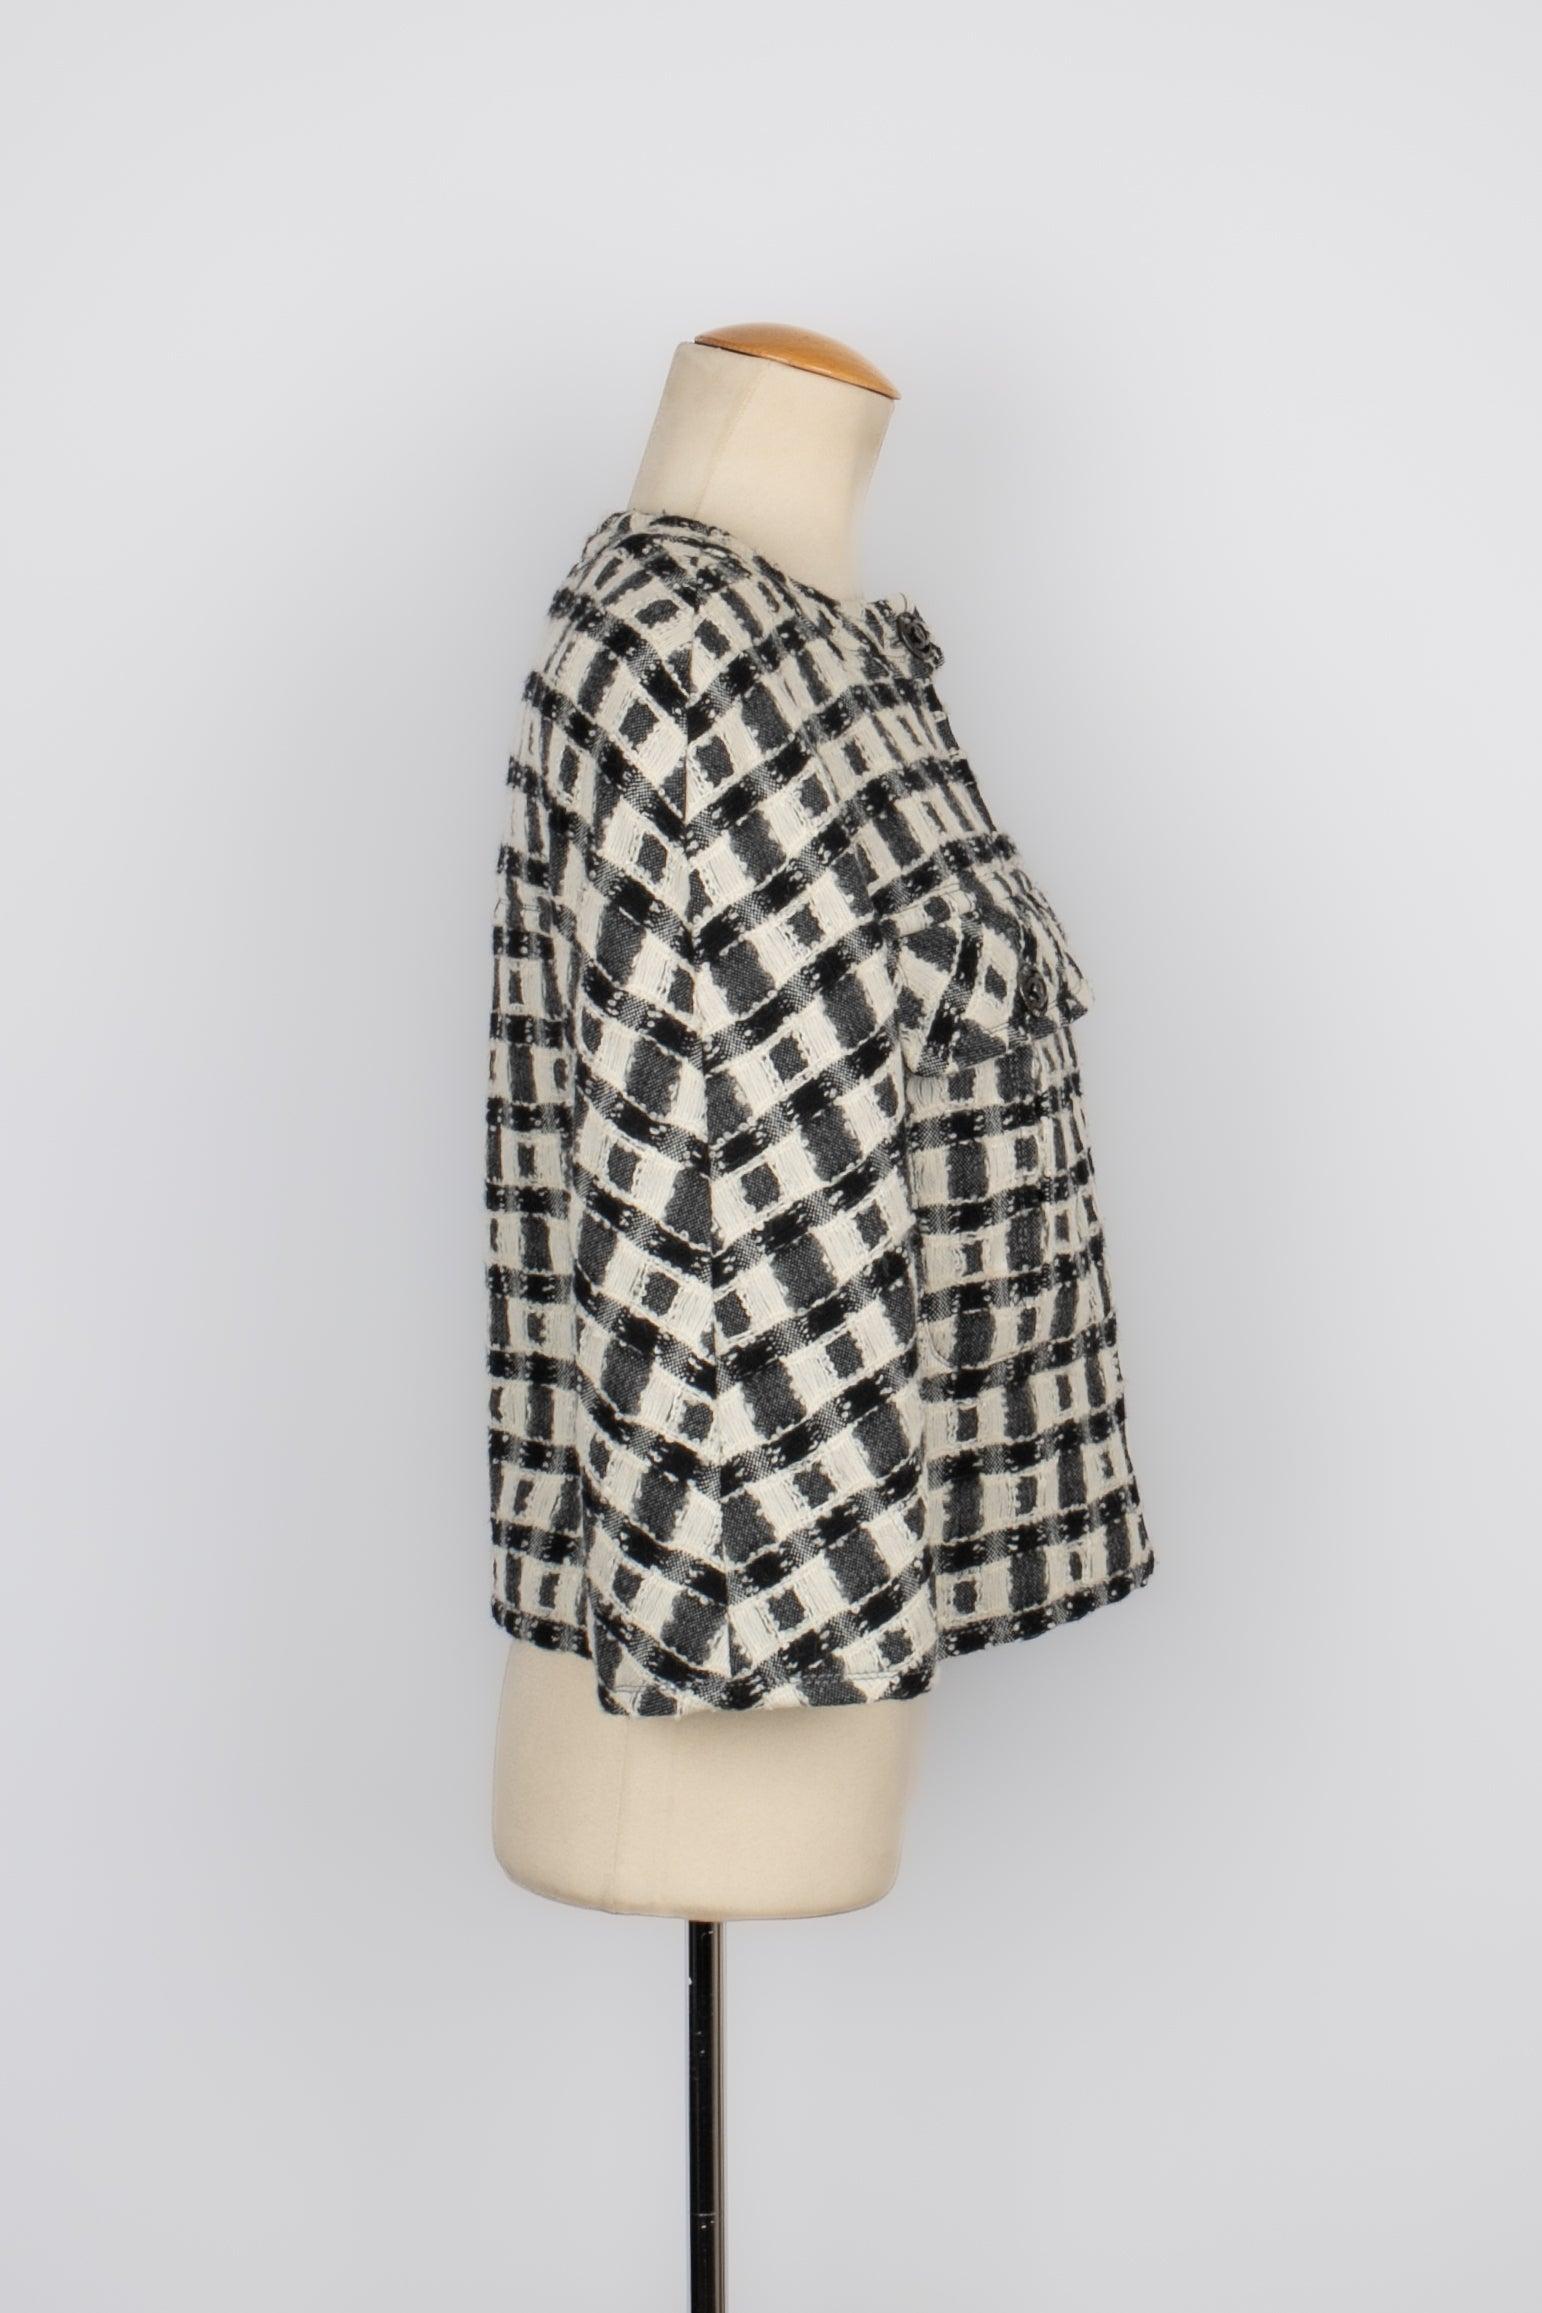 Chanel - Short jacket in black and white tweed, silk lining. No size indicated, it fits a 36FR/38FR.

Additional information:
Condition: Good condition
Dimensions: Shoulder width: 40 cm - Chest: 44 cm - Sleeve length: 42 cm - Length: 49 cm

Seller